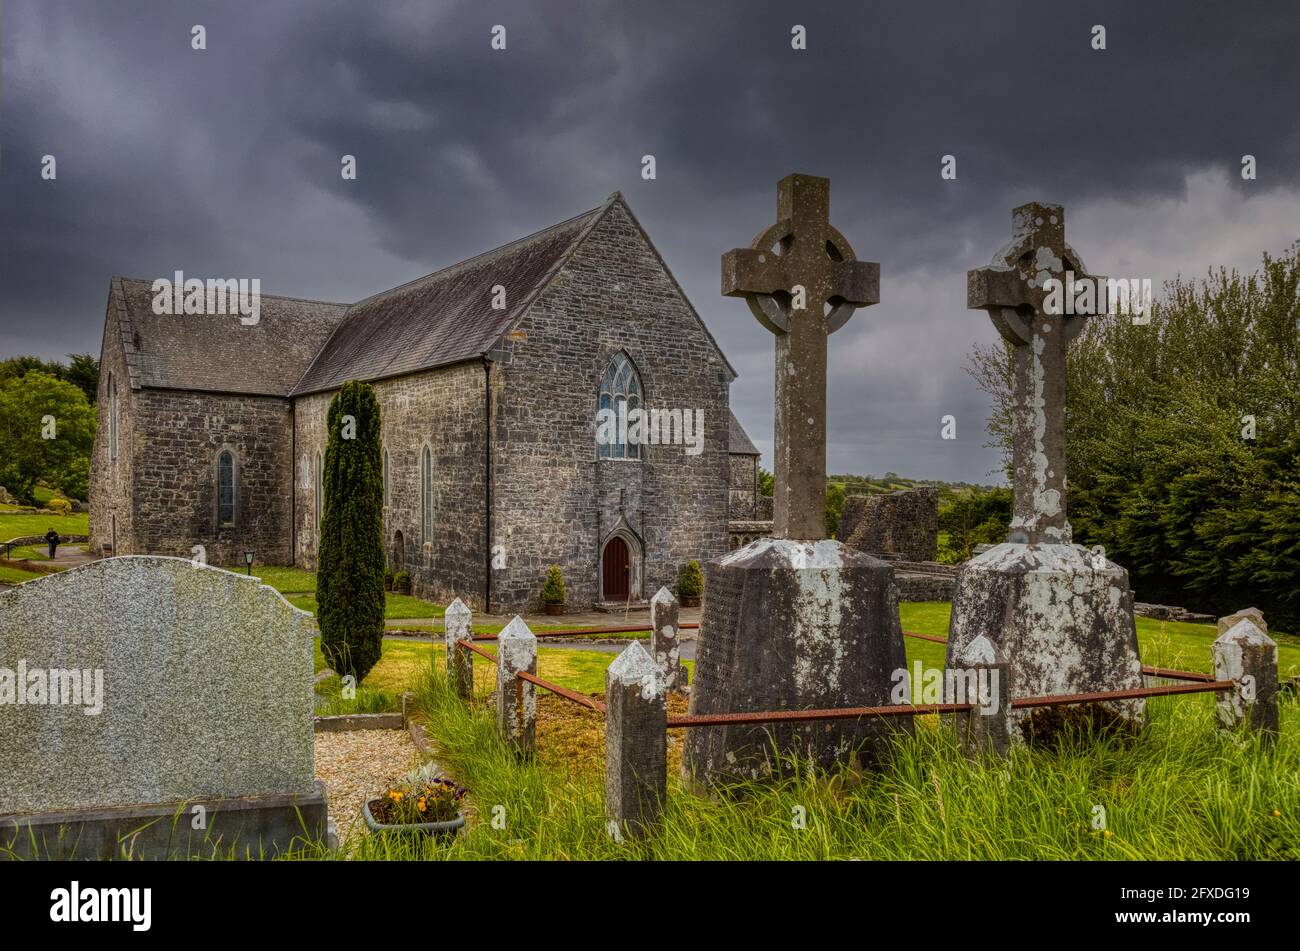 Dark stormy sky over an old graveyard and ruins of a stone cchurch Stock Photo